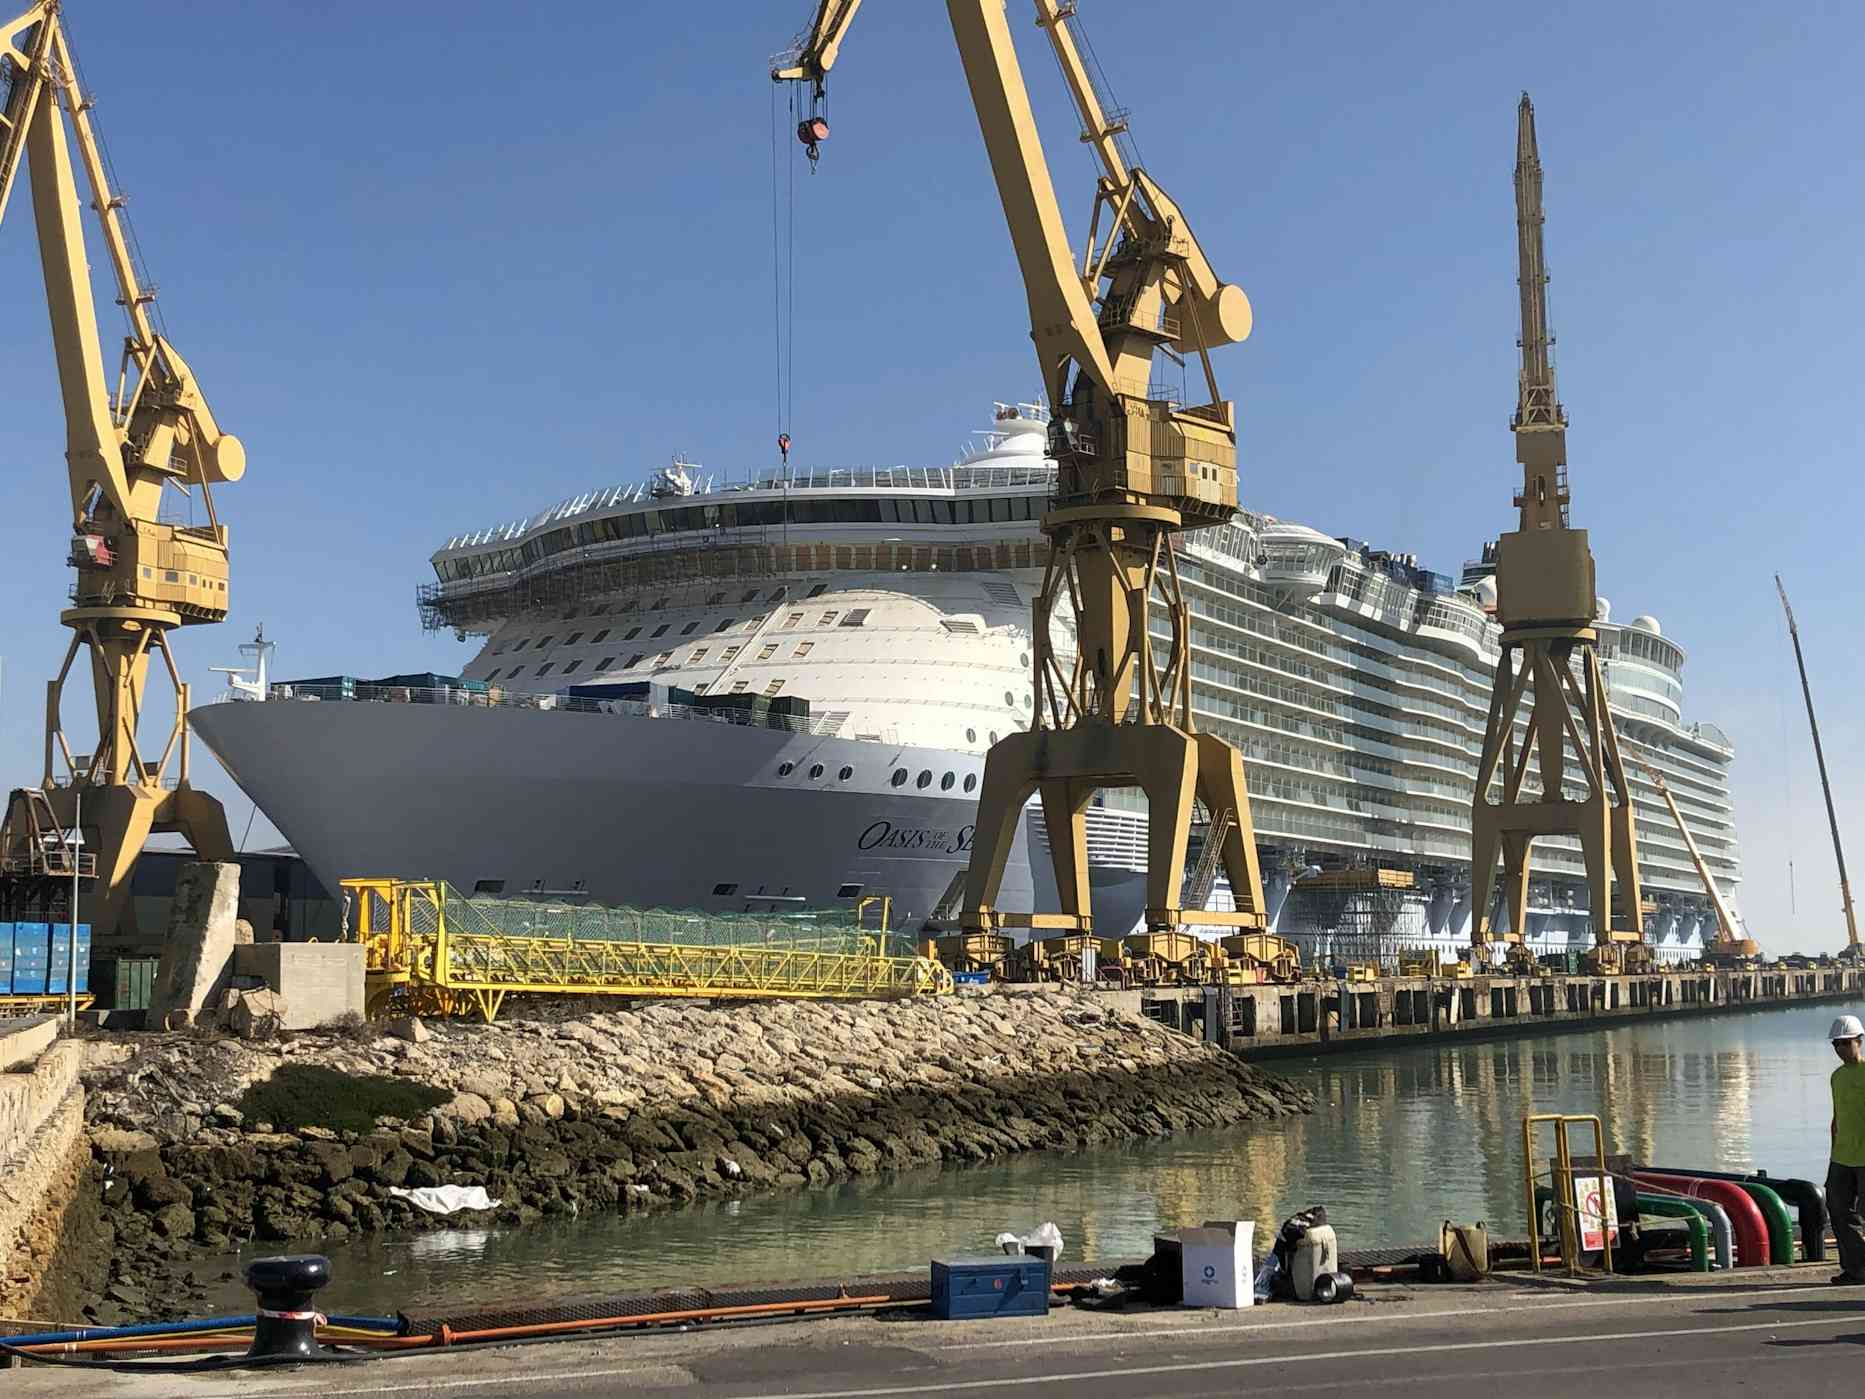 Just Back from the Newly Refurbished Oasis of the Seas: Still at